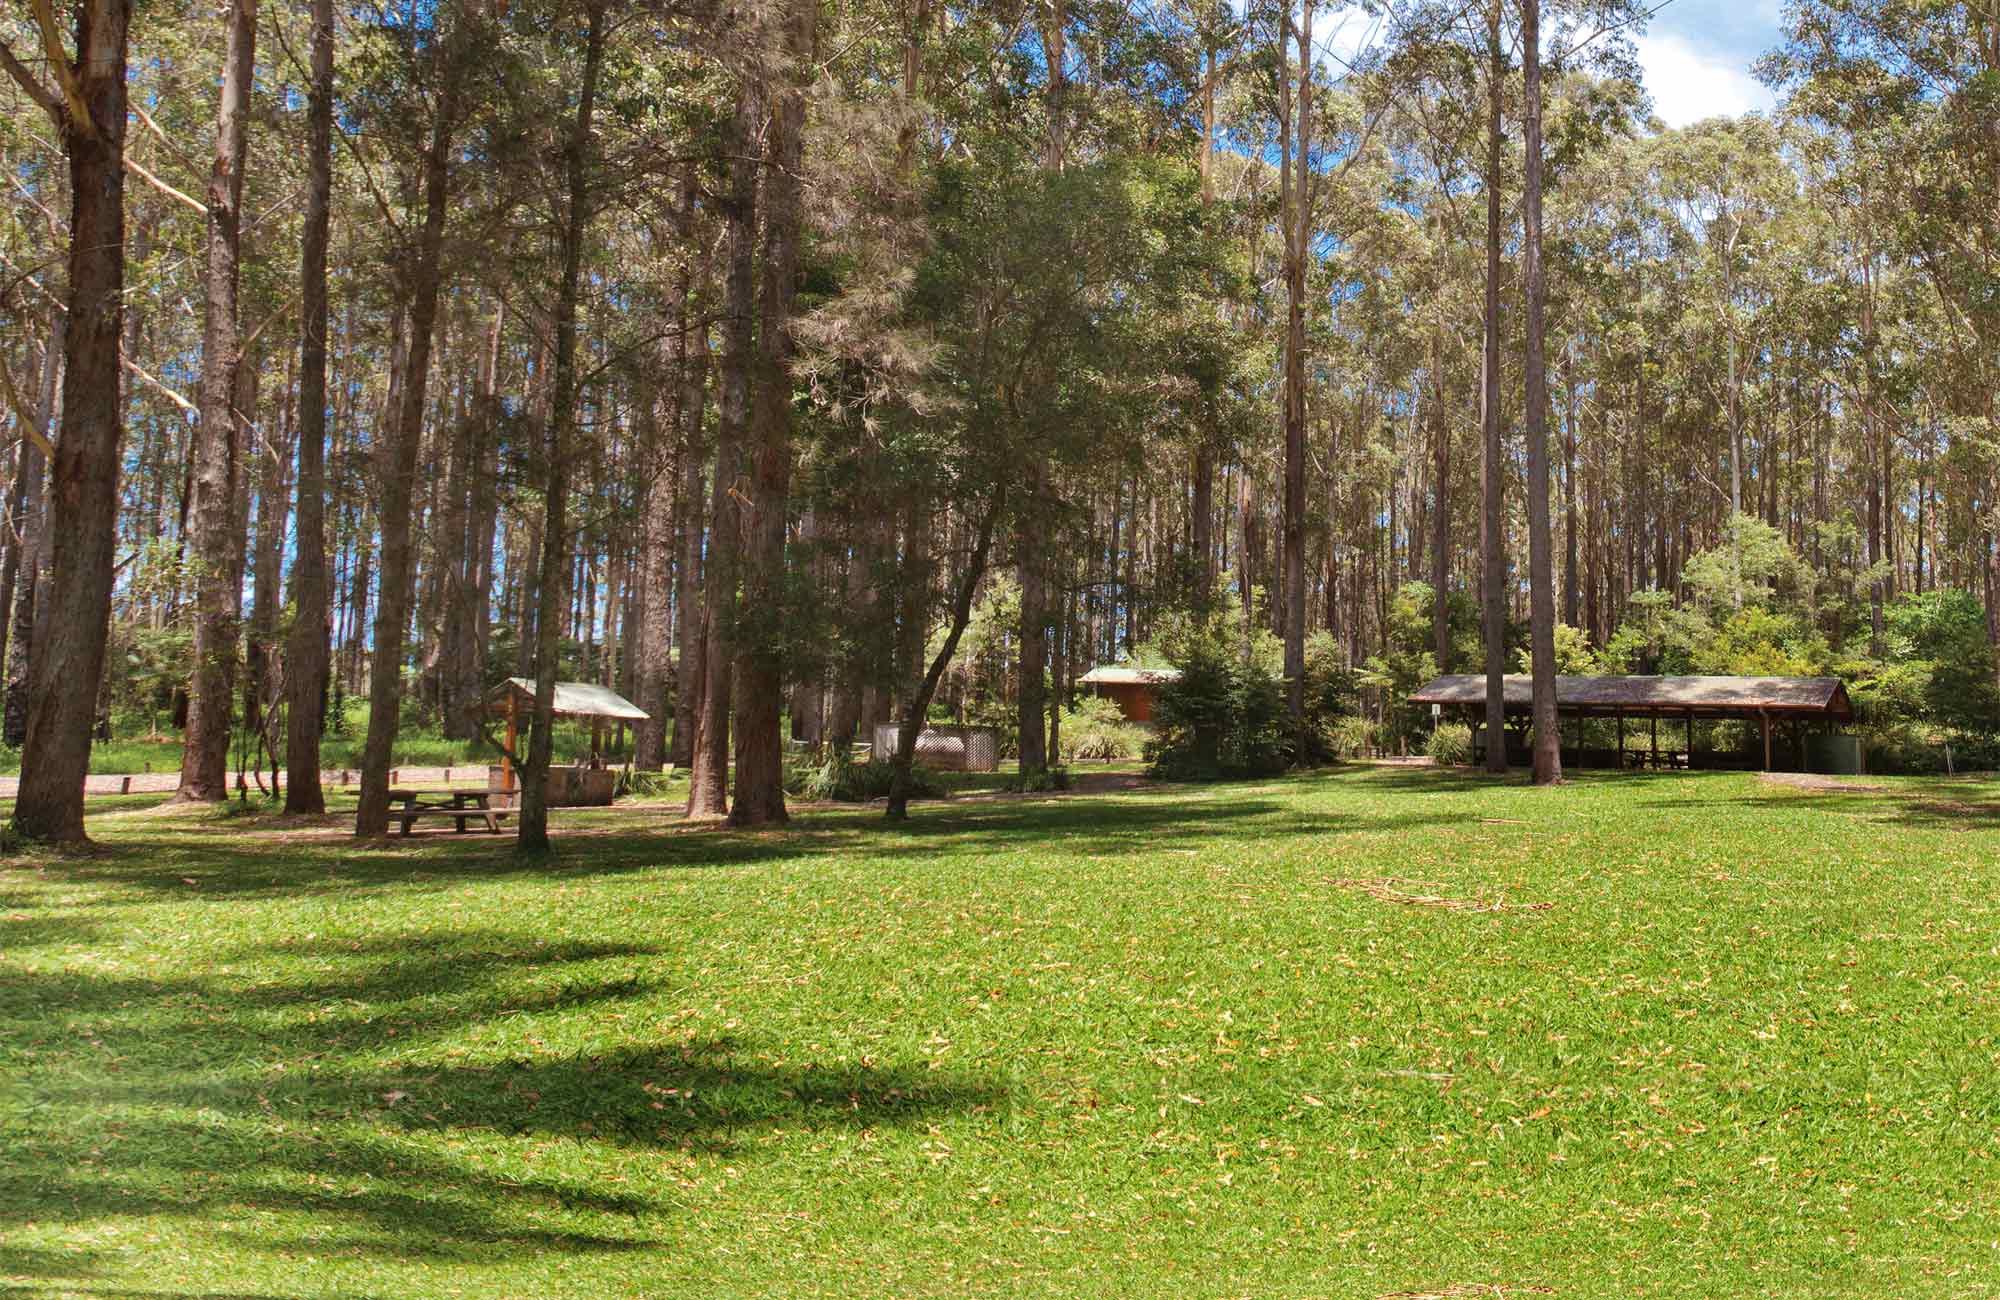 The picnic area. Photo: Rob Cleary 